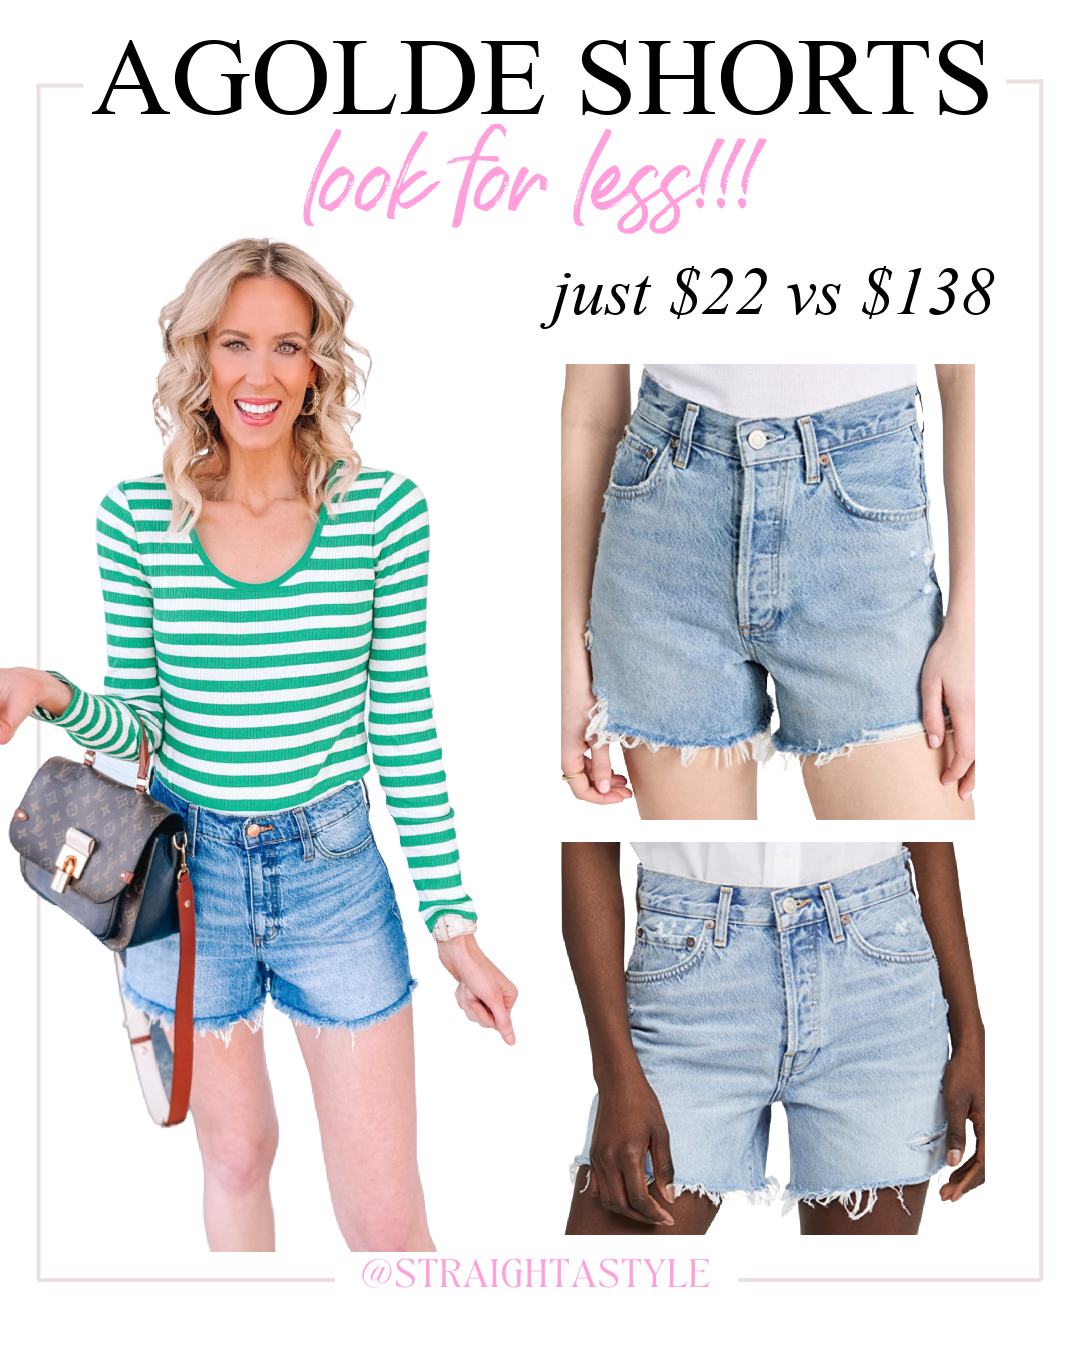 Agolde Shorts Look for Less Shorts - Target Jean Shorts - Straight A Style